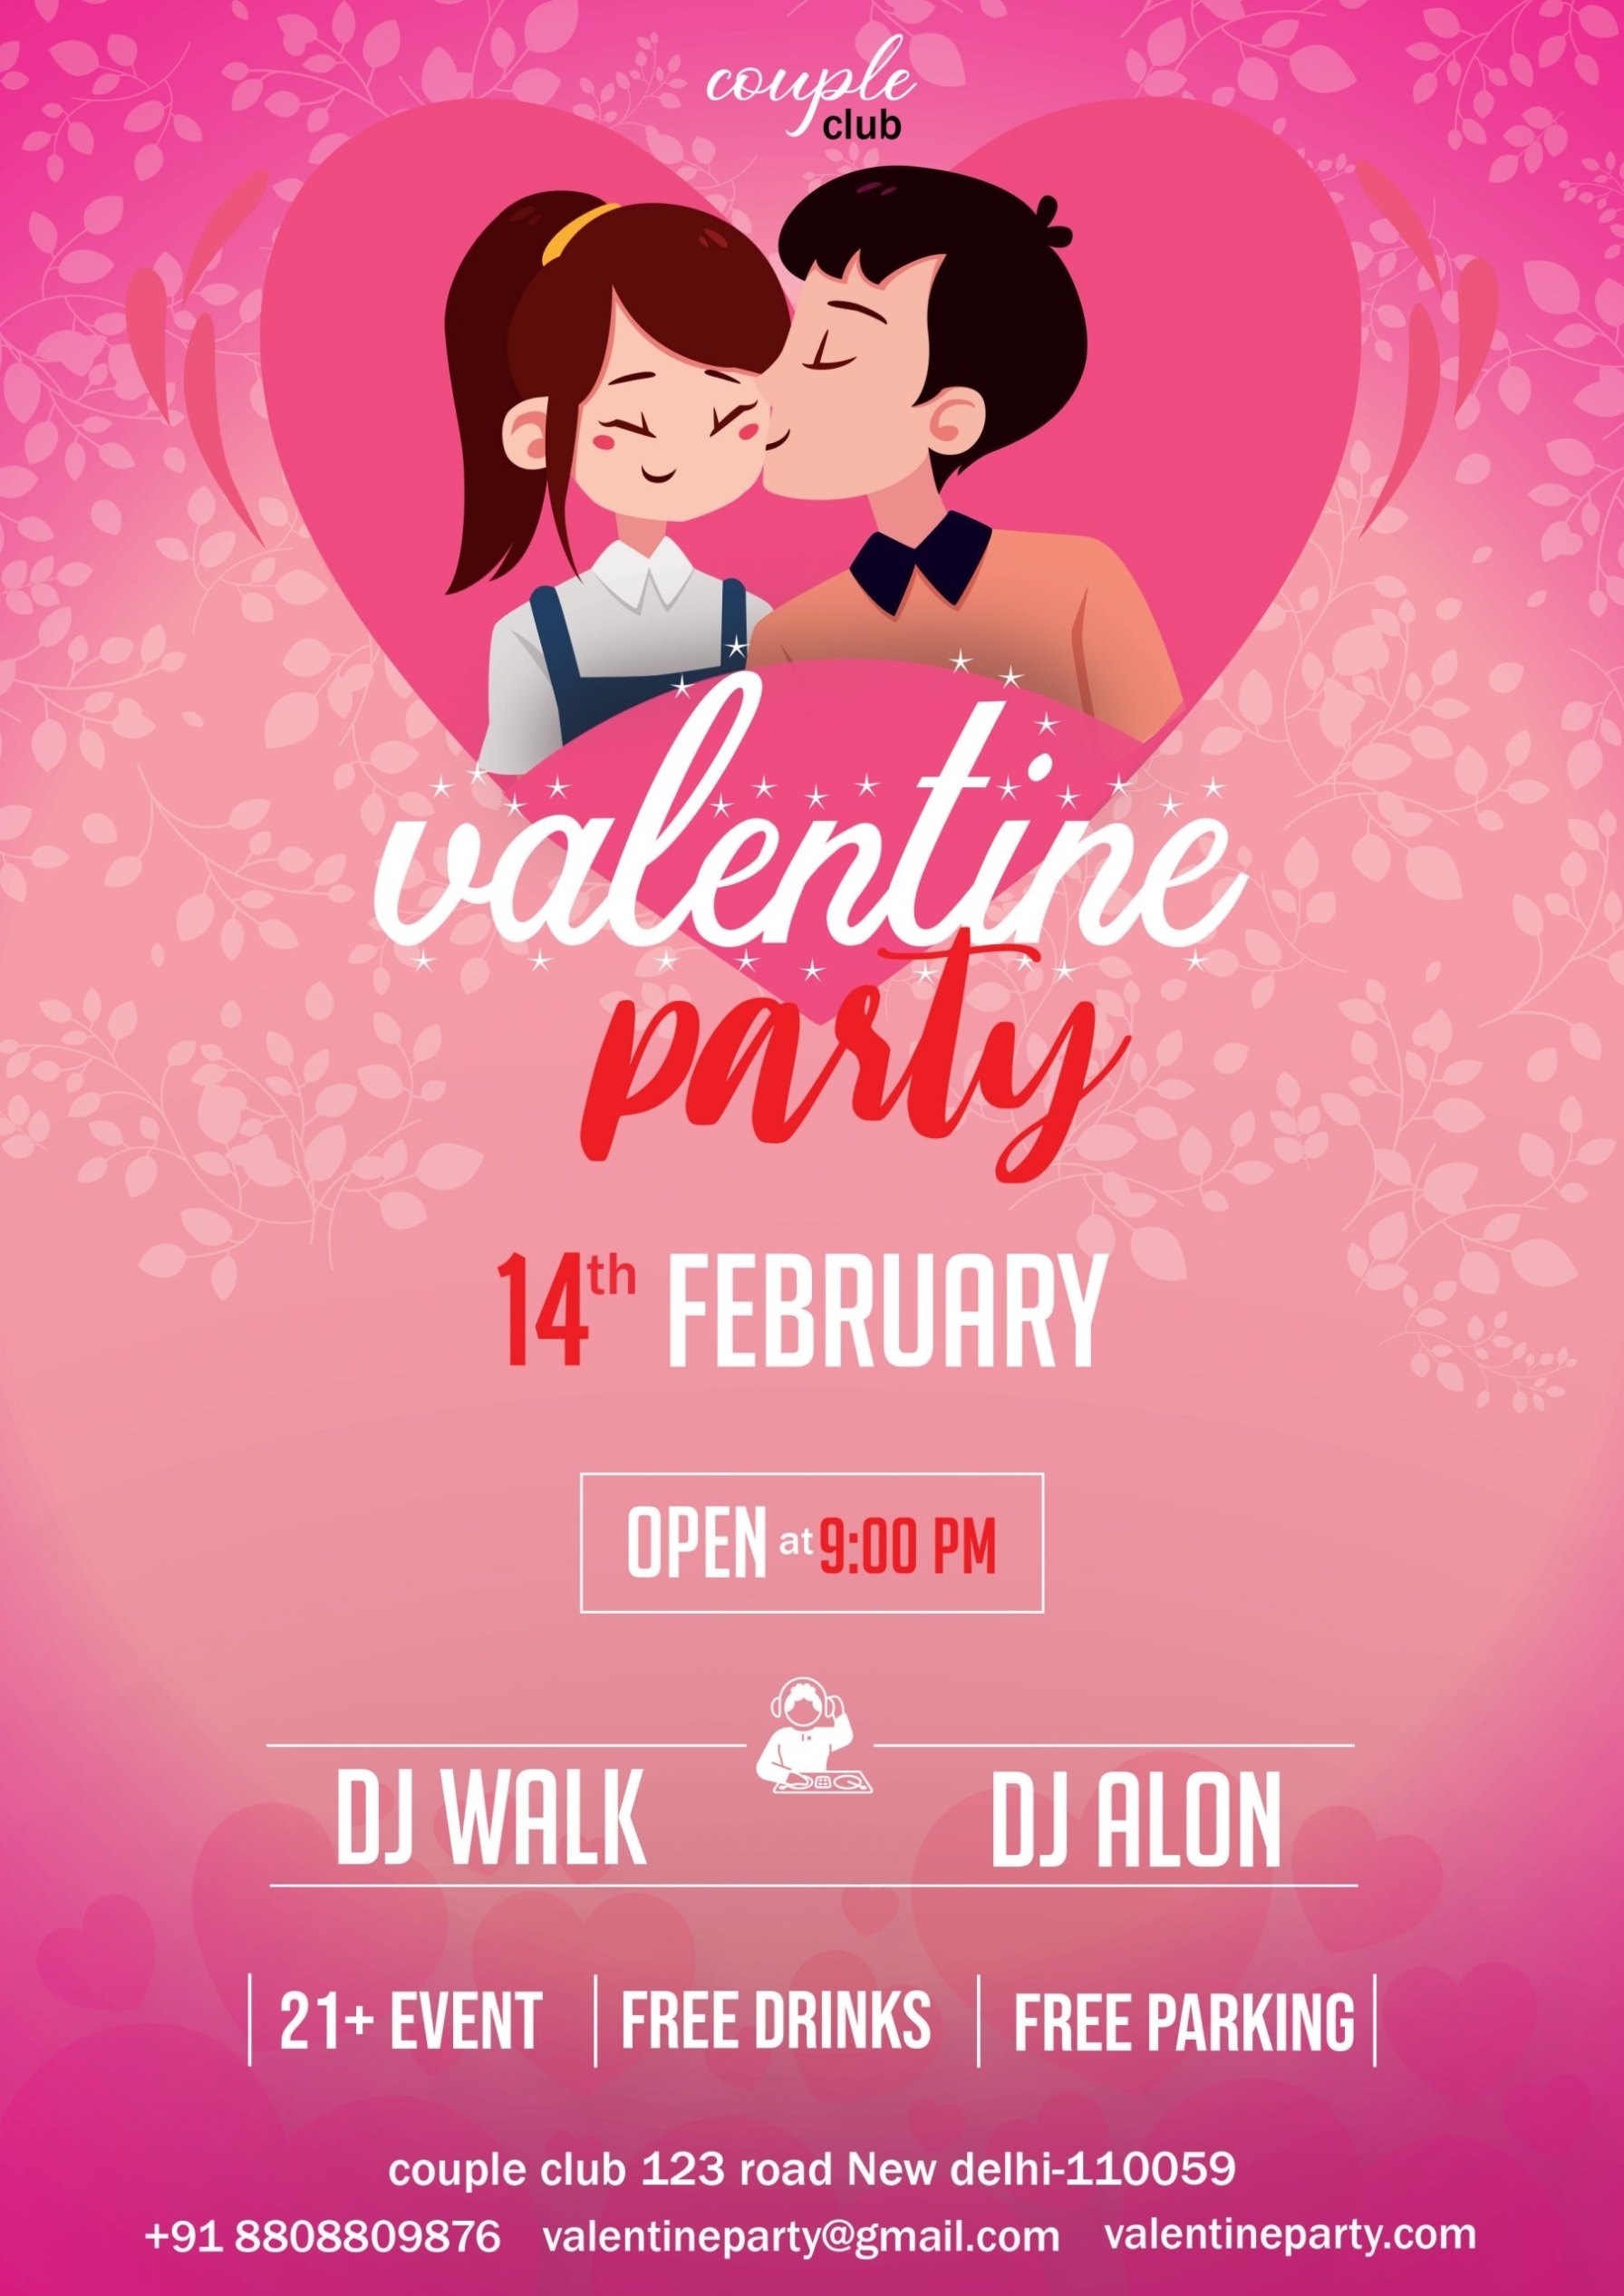 Valentine Day Party Flyer Free Psd Templates | Freedownloadpsd for Valentines Day Flyer Template Free